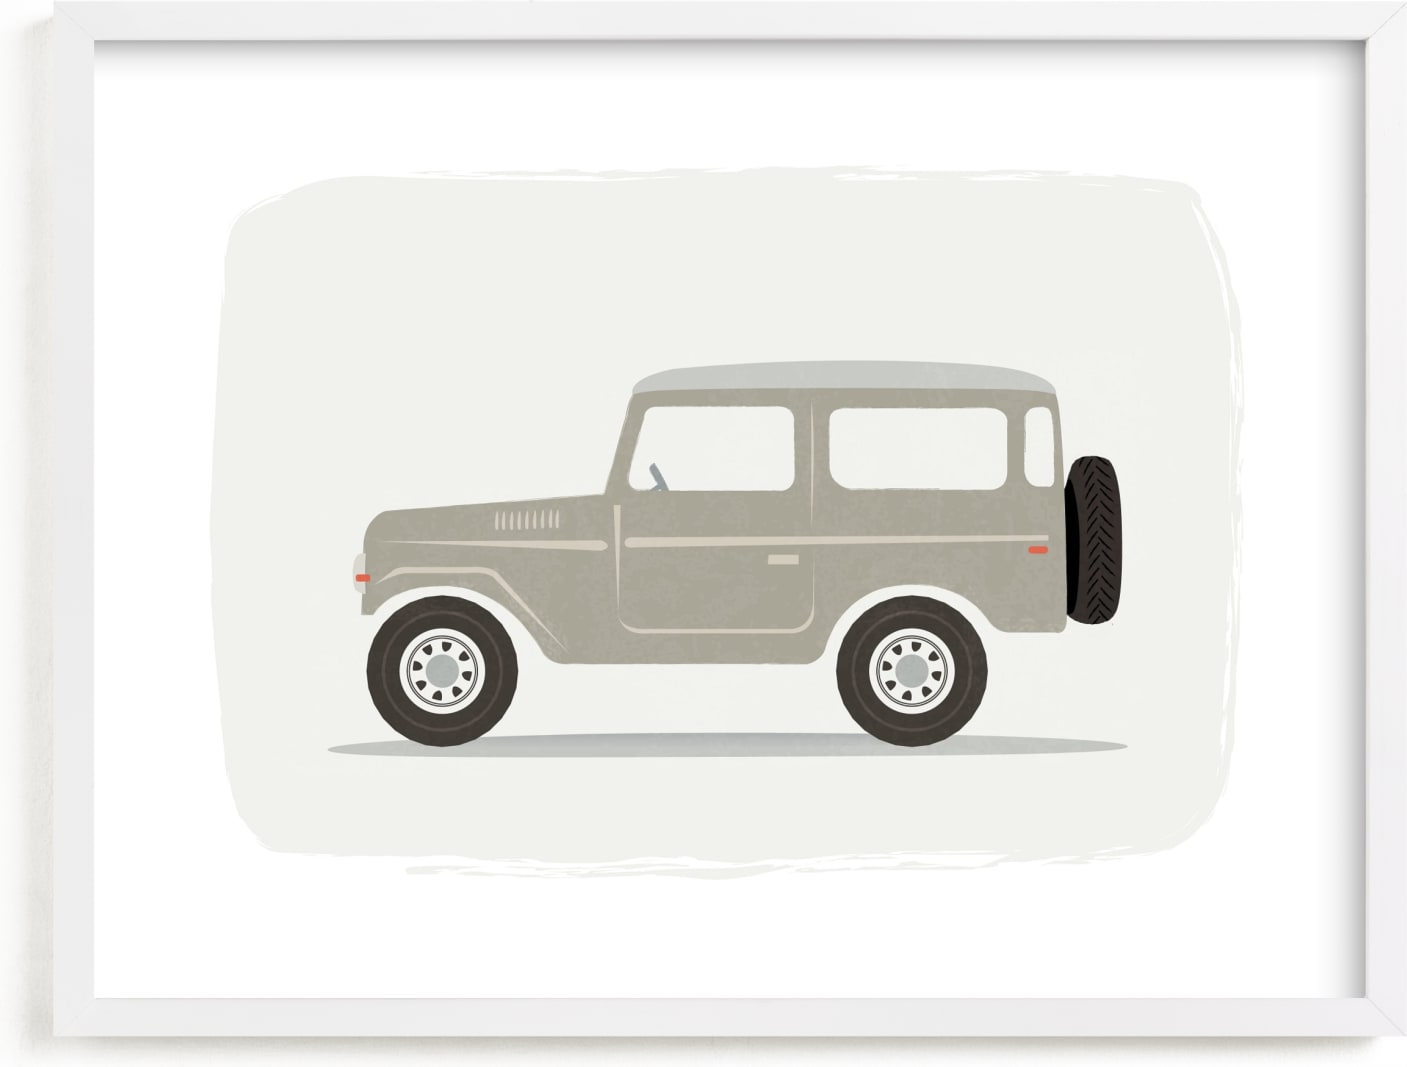 This is a white art by Karidy Walker called Vintage Land Cruiser.